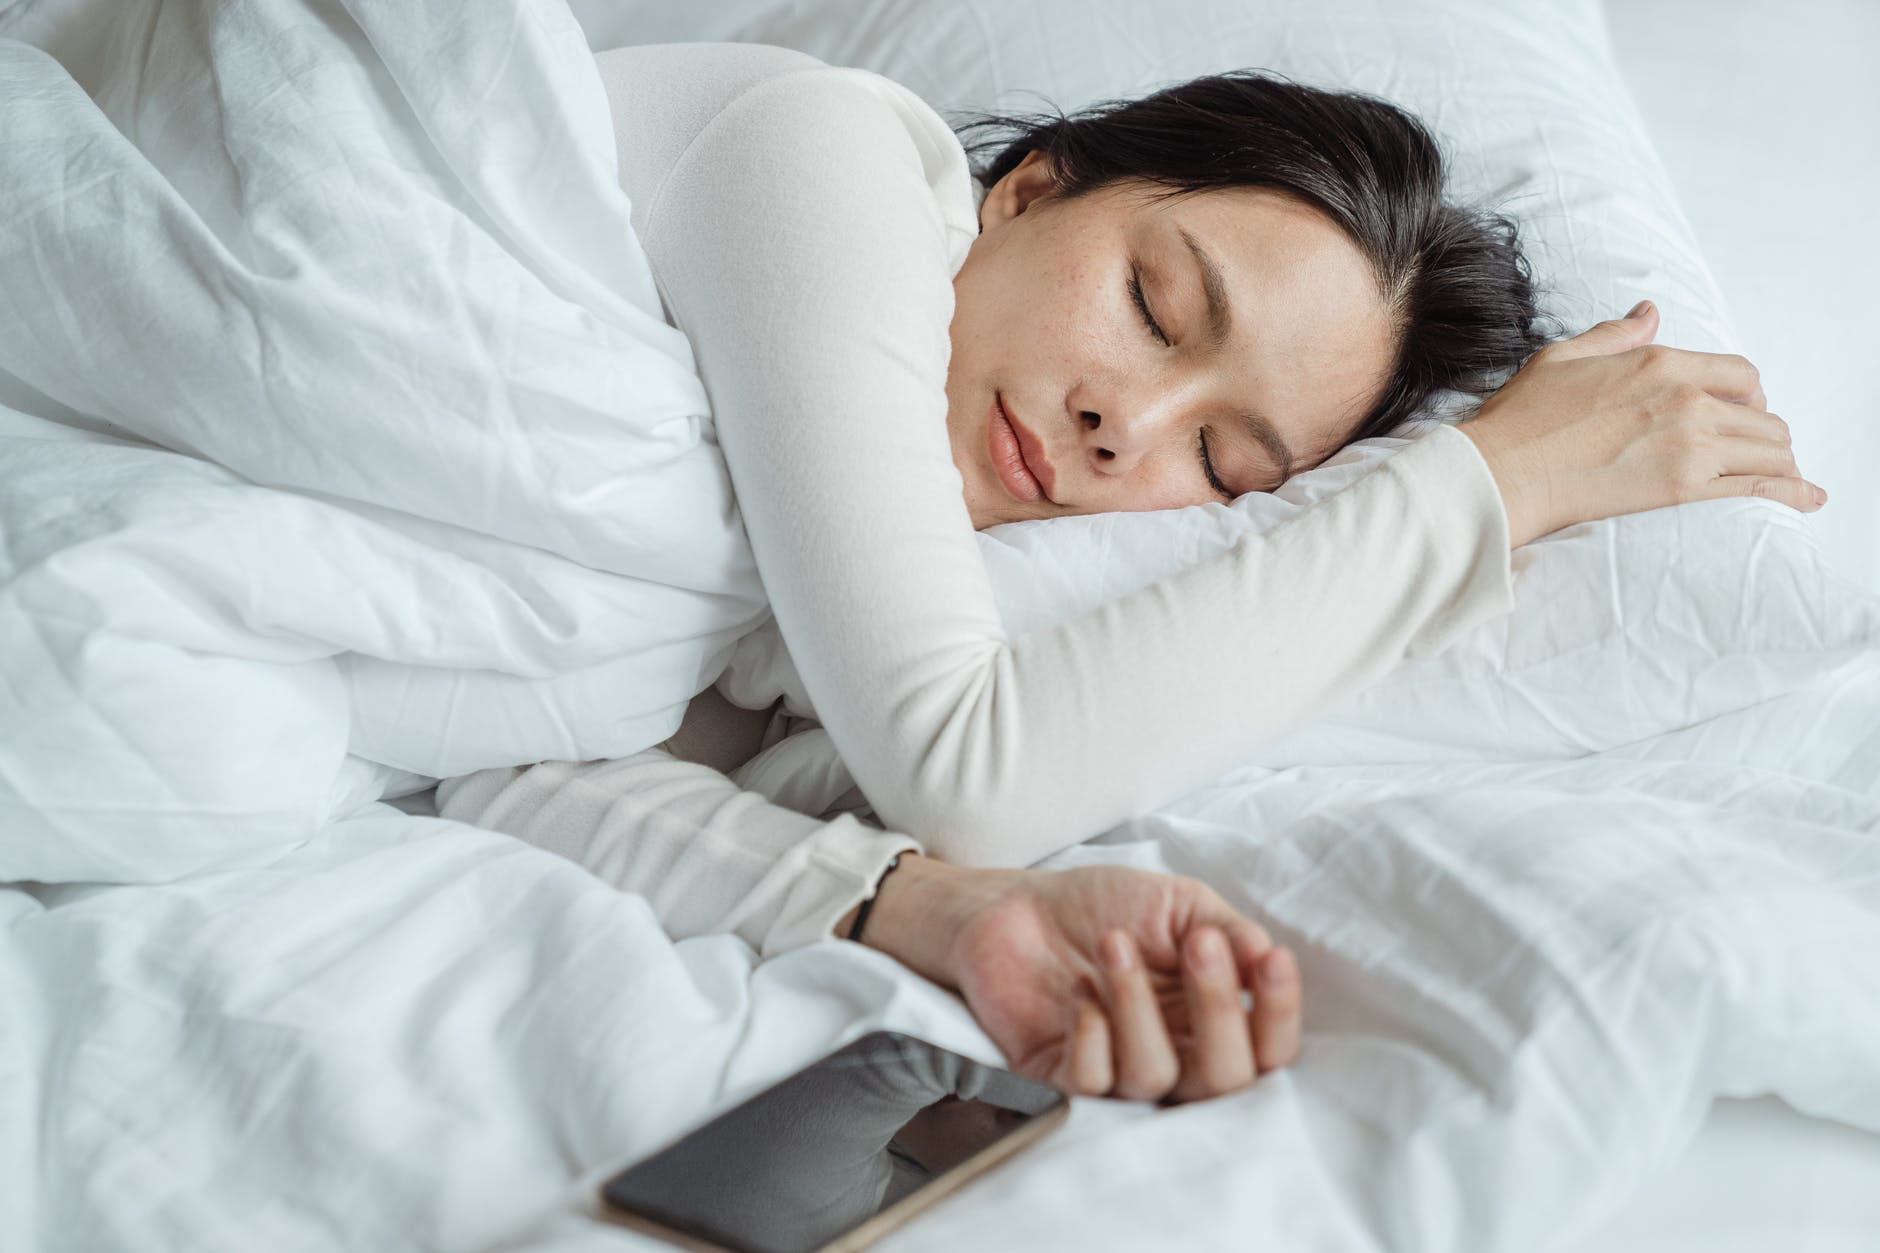 The 3-S Rule to Fall Asleep In 5 Minutes